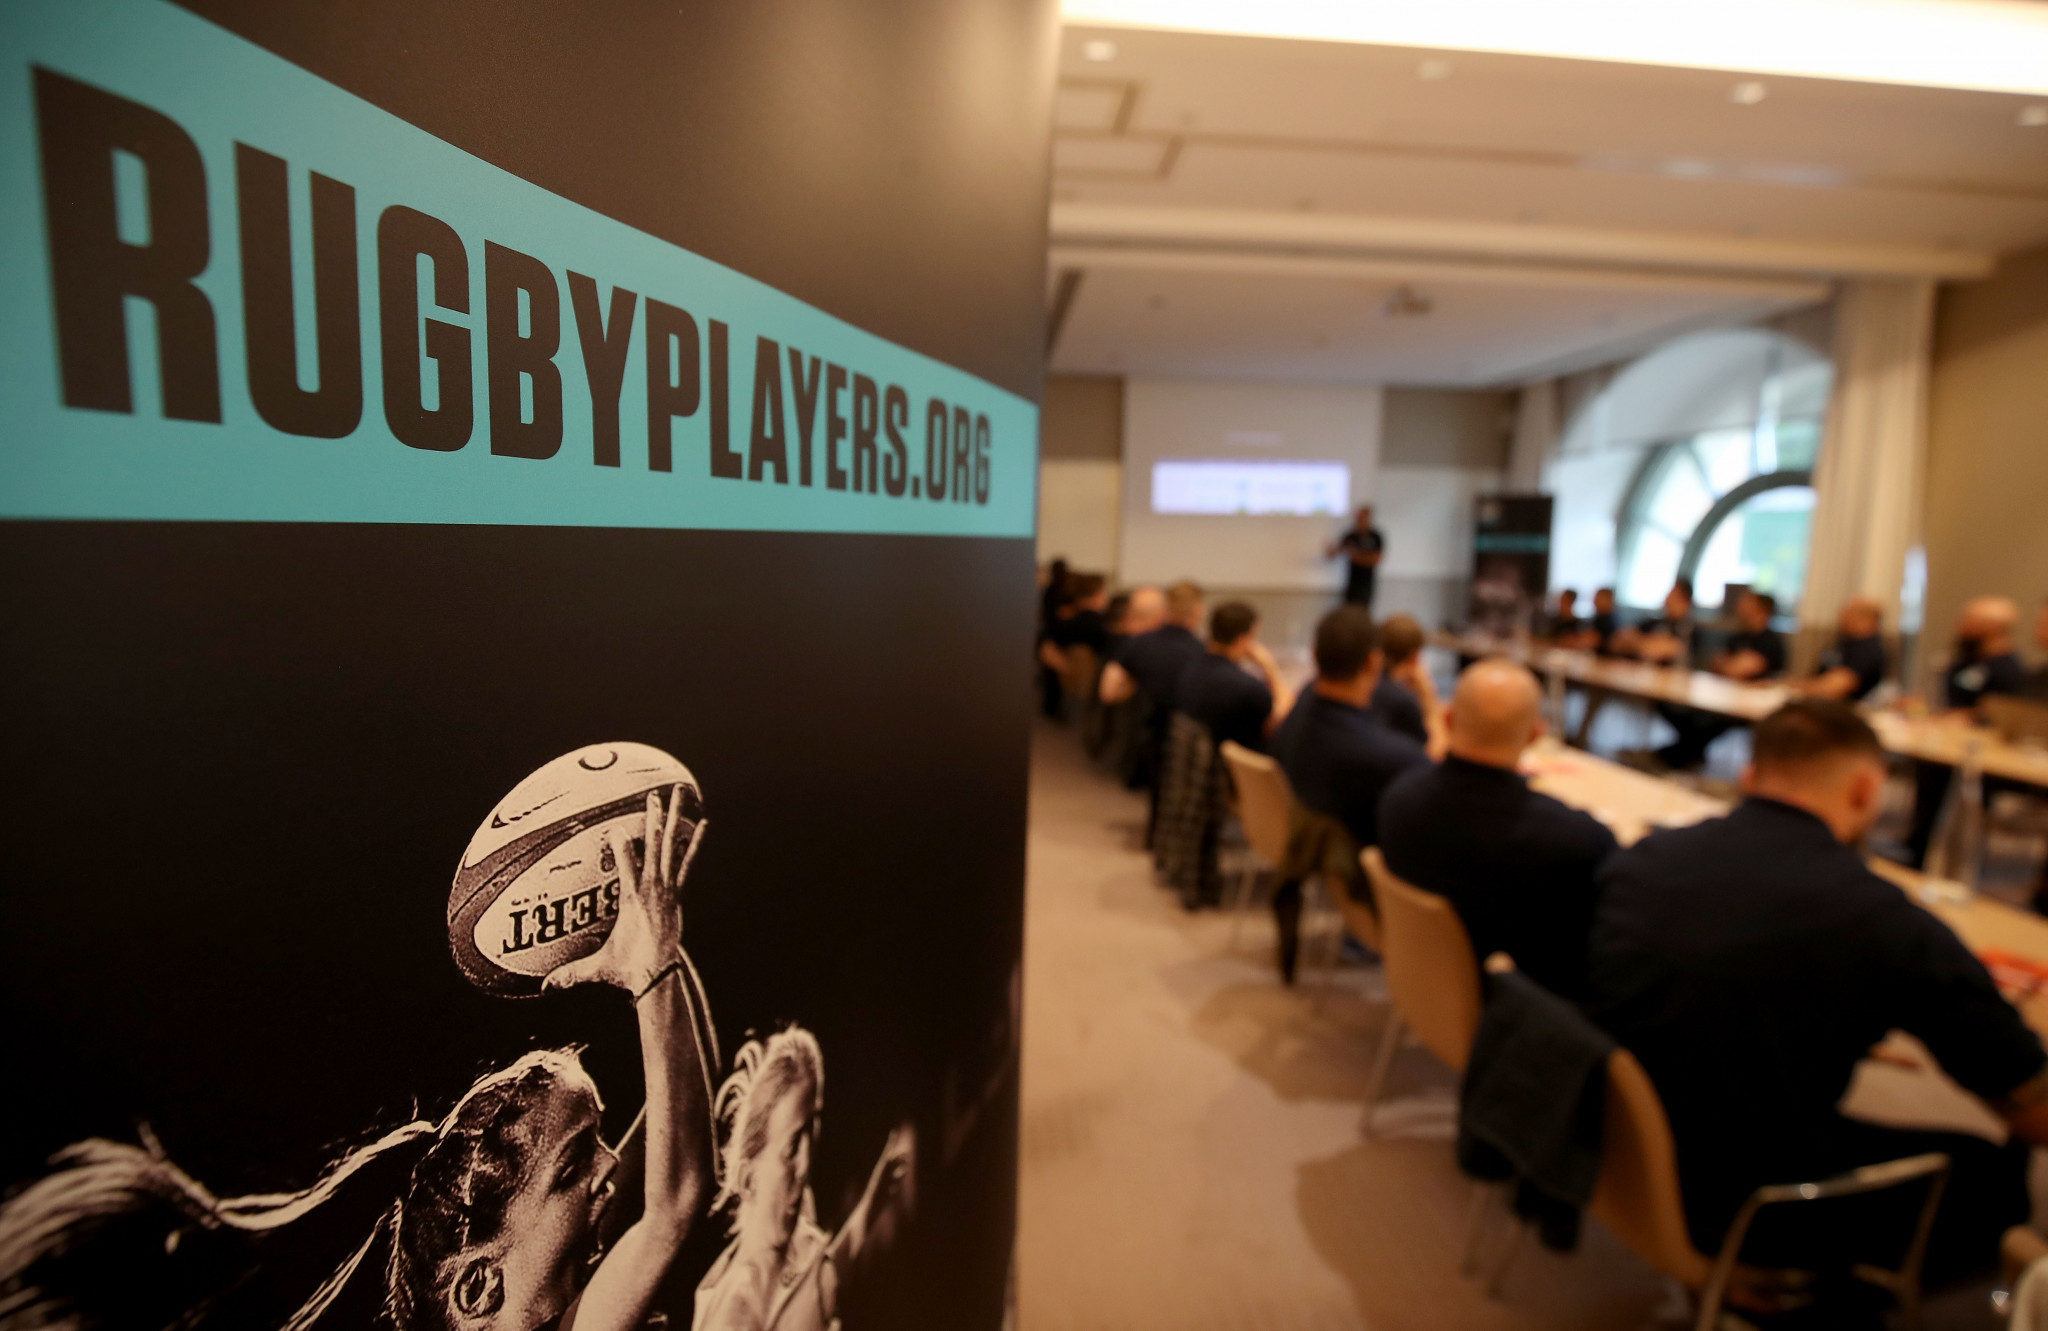 Members of the International Rugby Players Council have voiced serious concerns over safety issues regarding World Rugby's plans for a new global competition format ©INPHO Photography